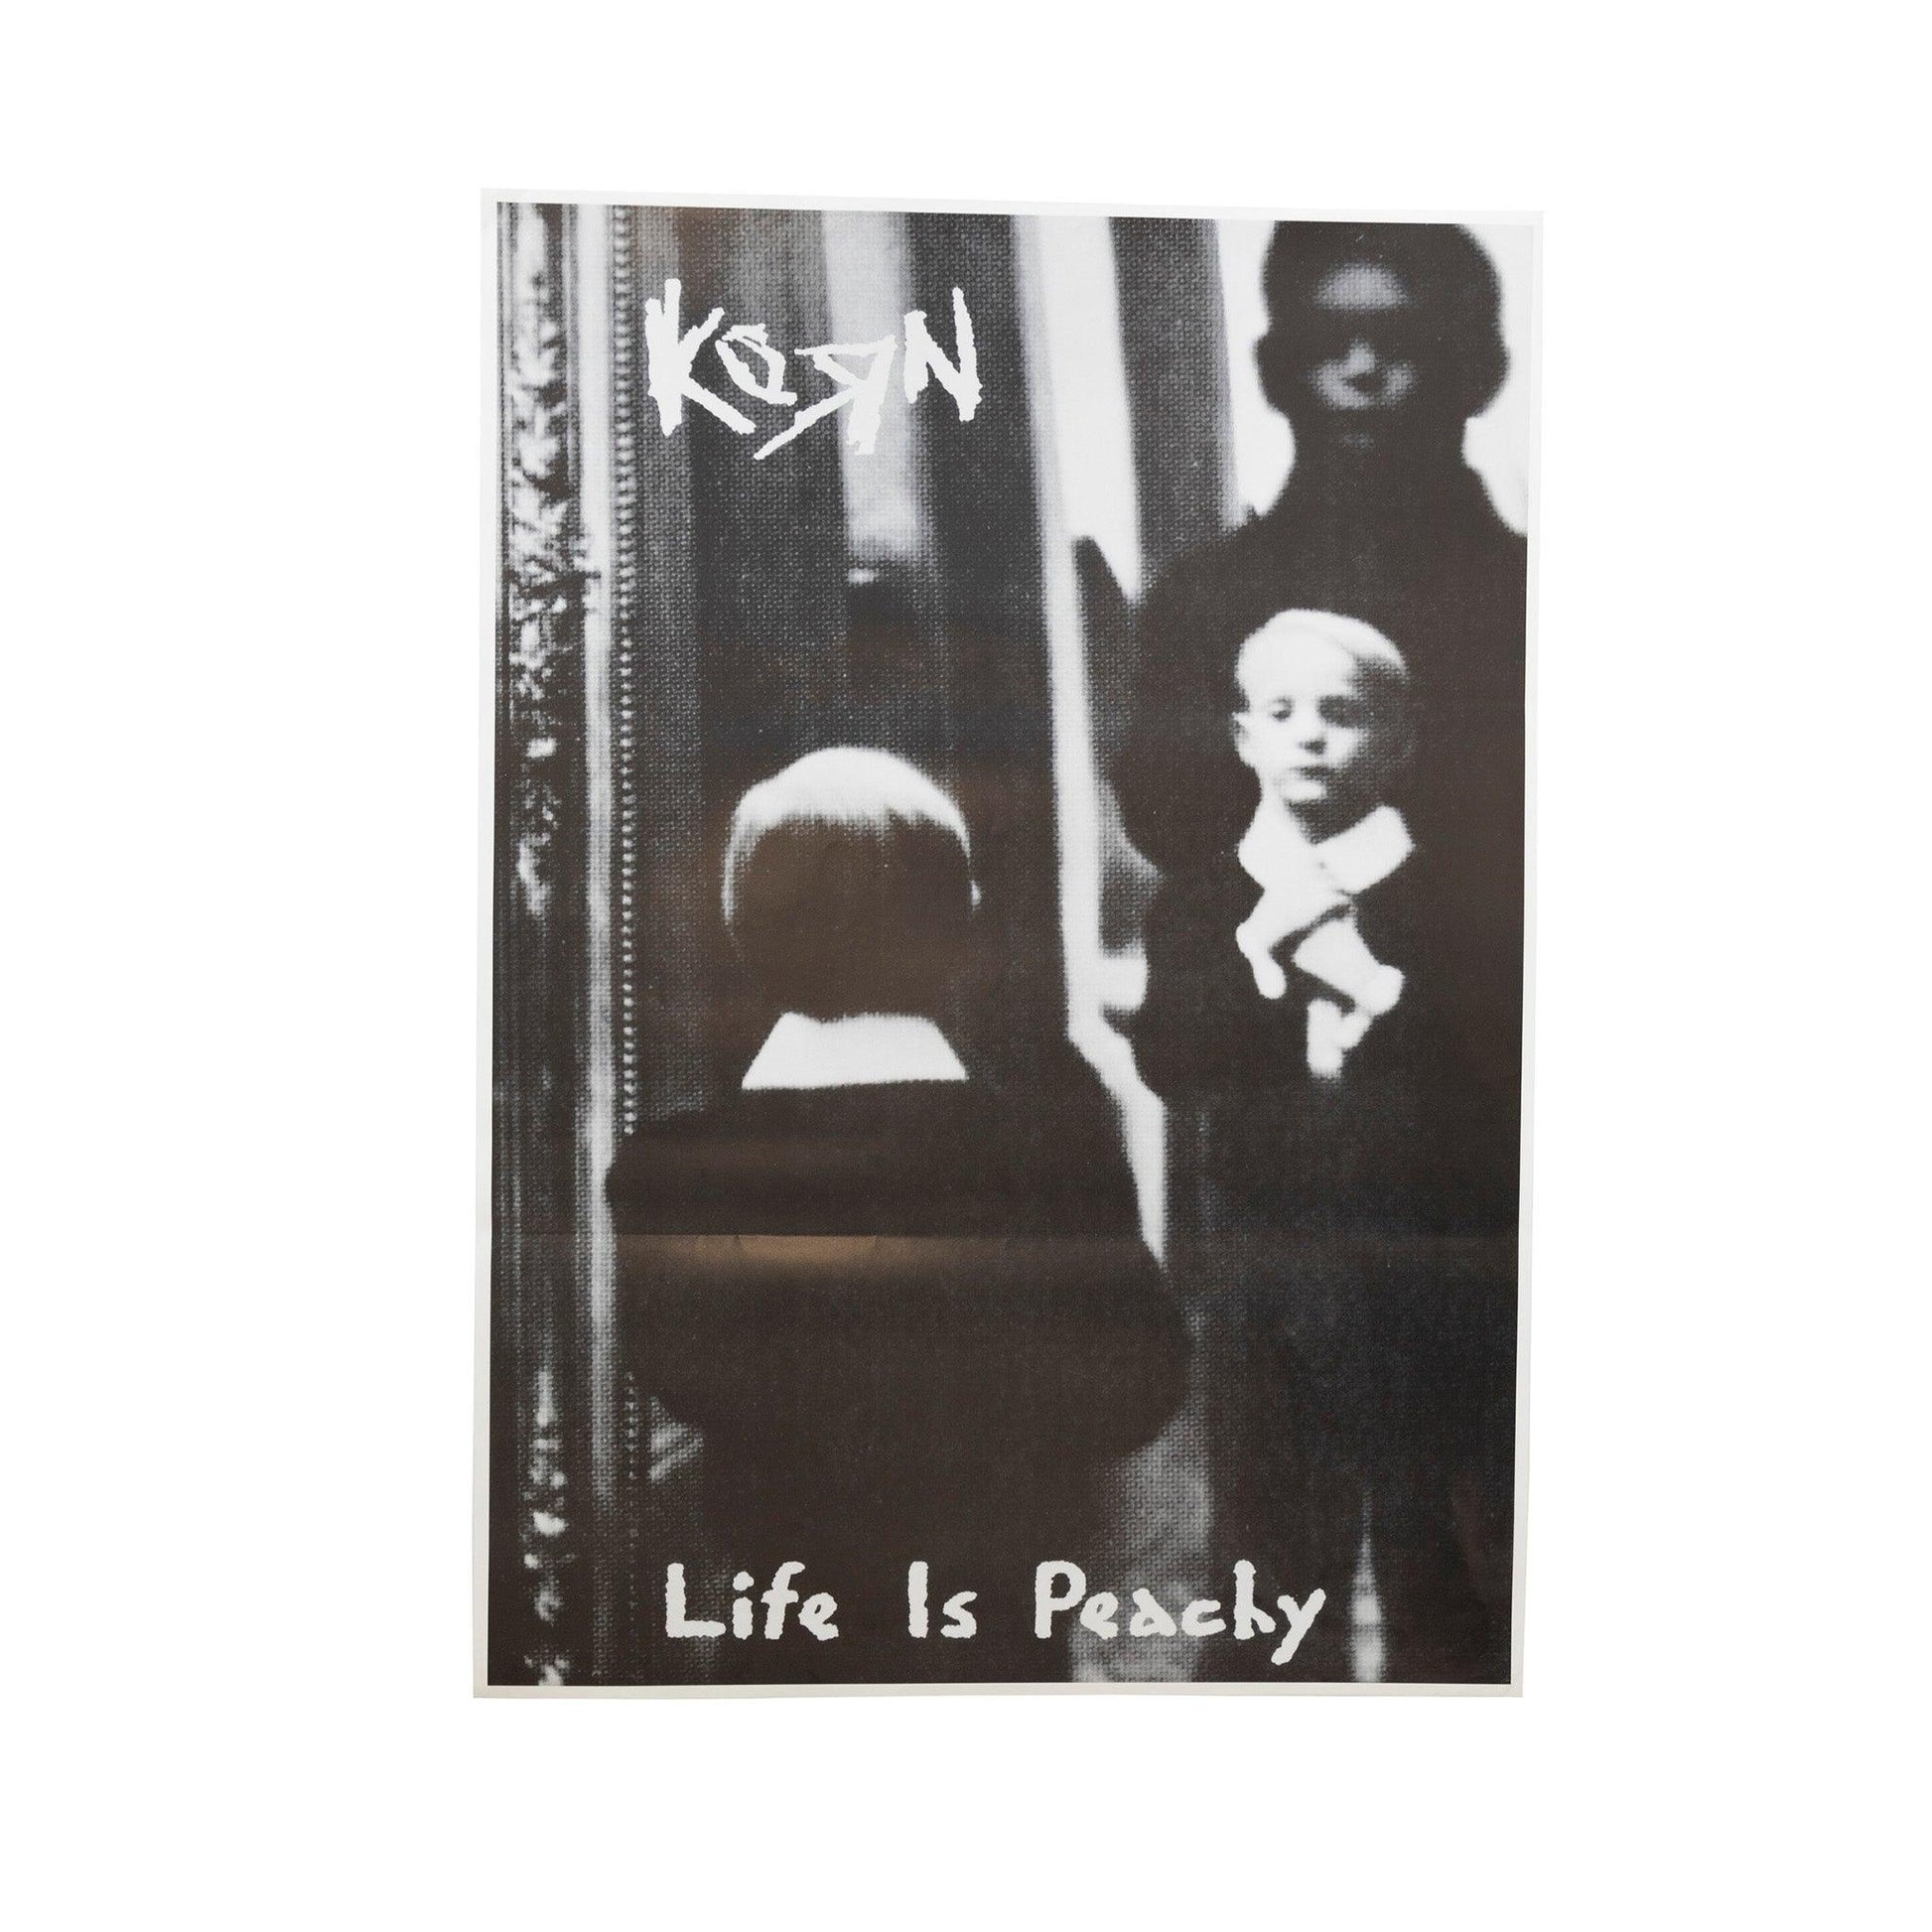 Korn Life Is Peachy Poster - Known Source